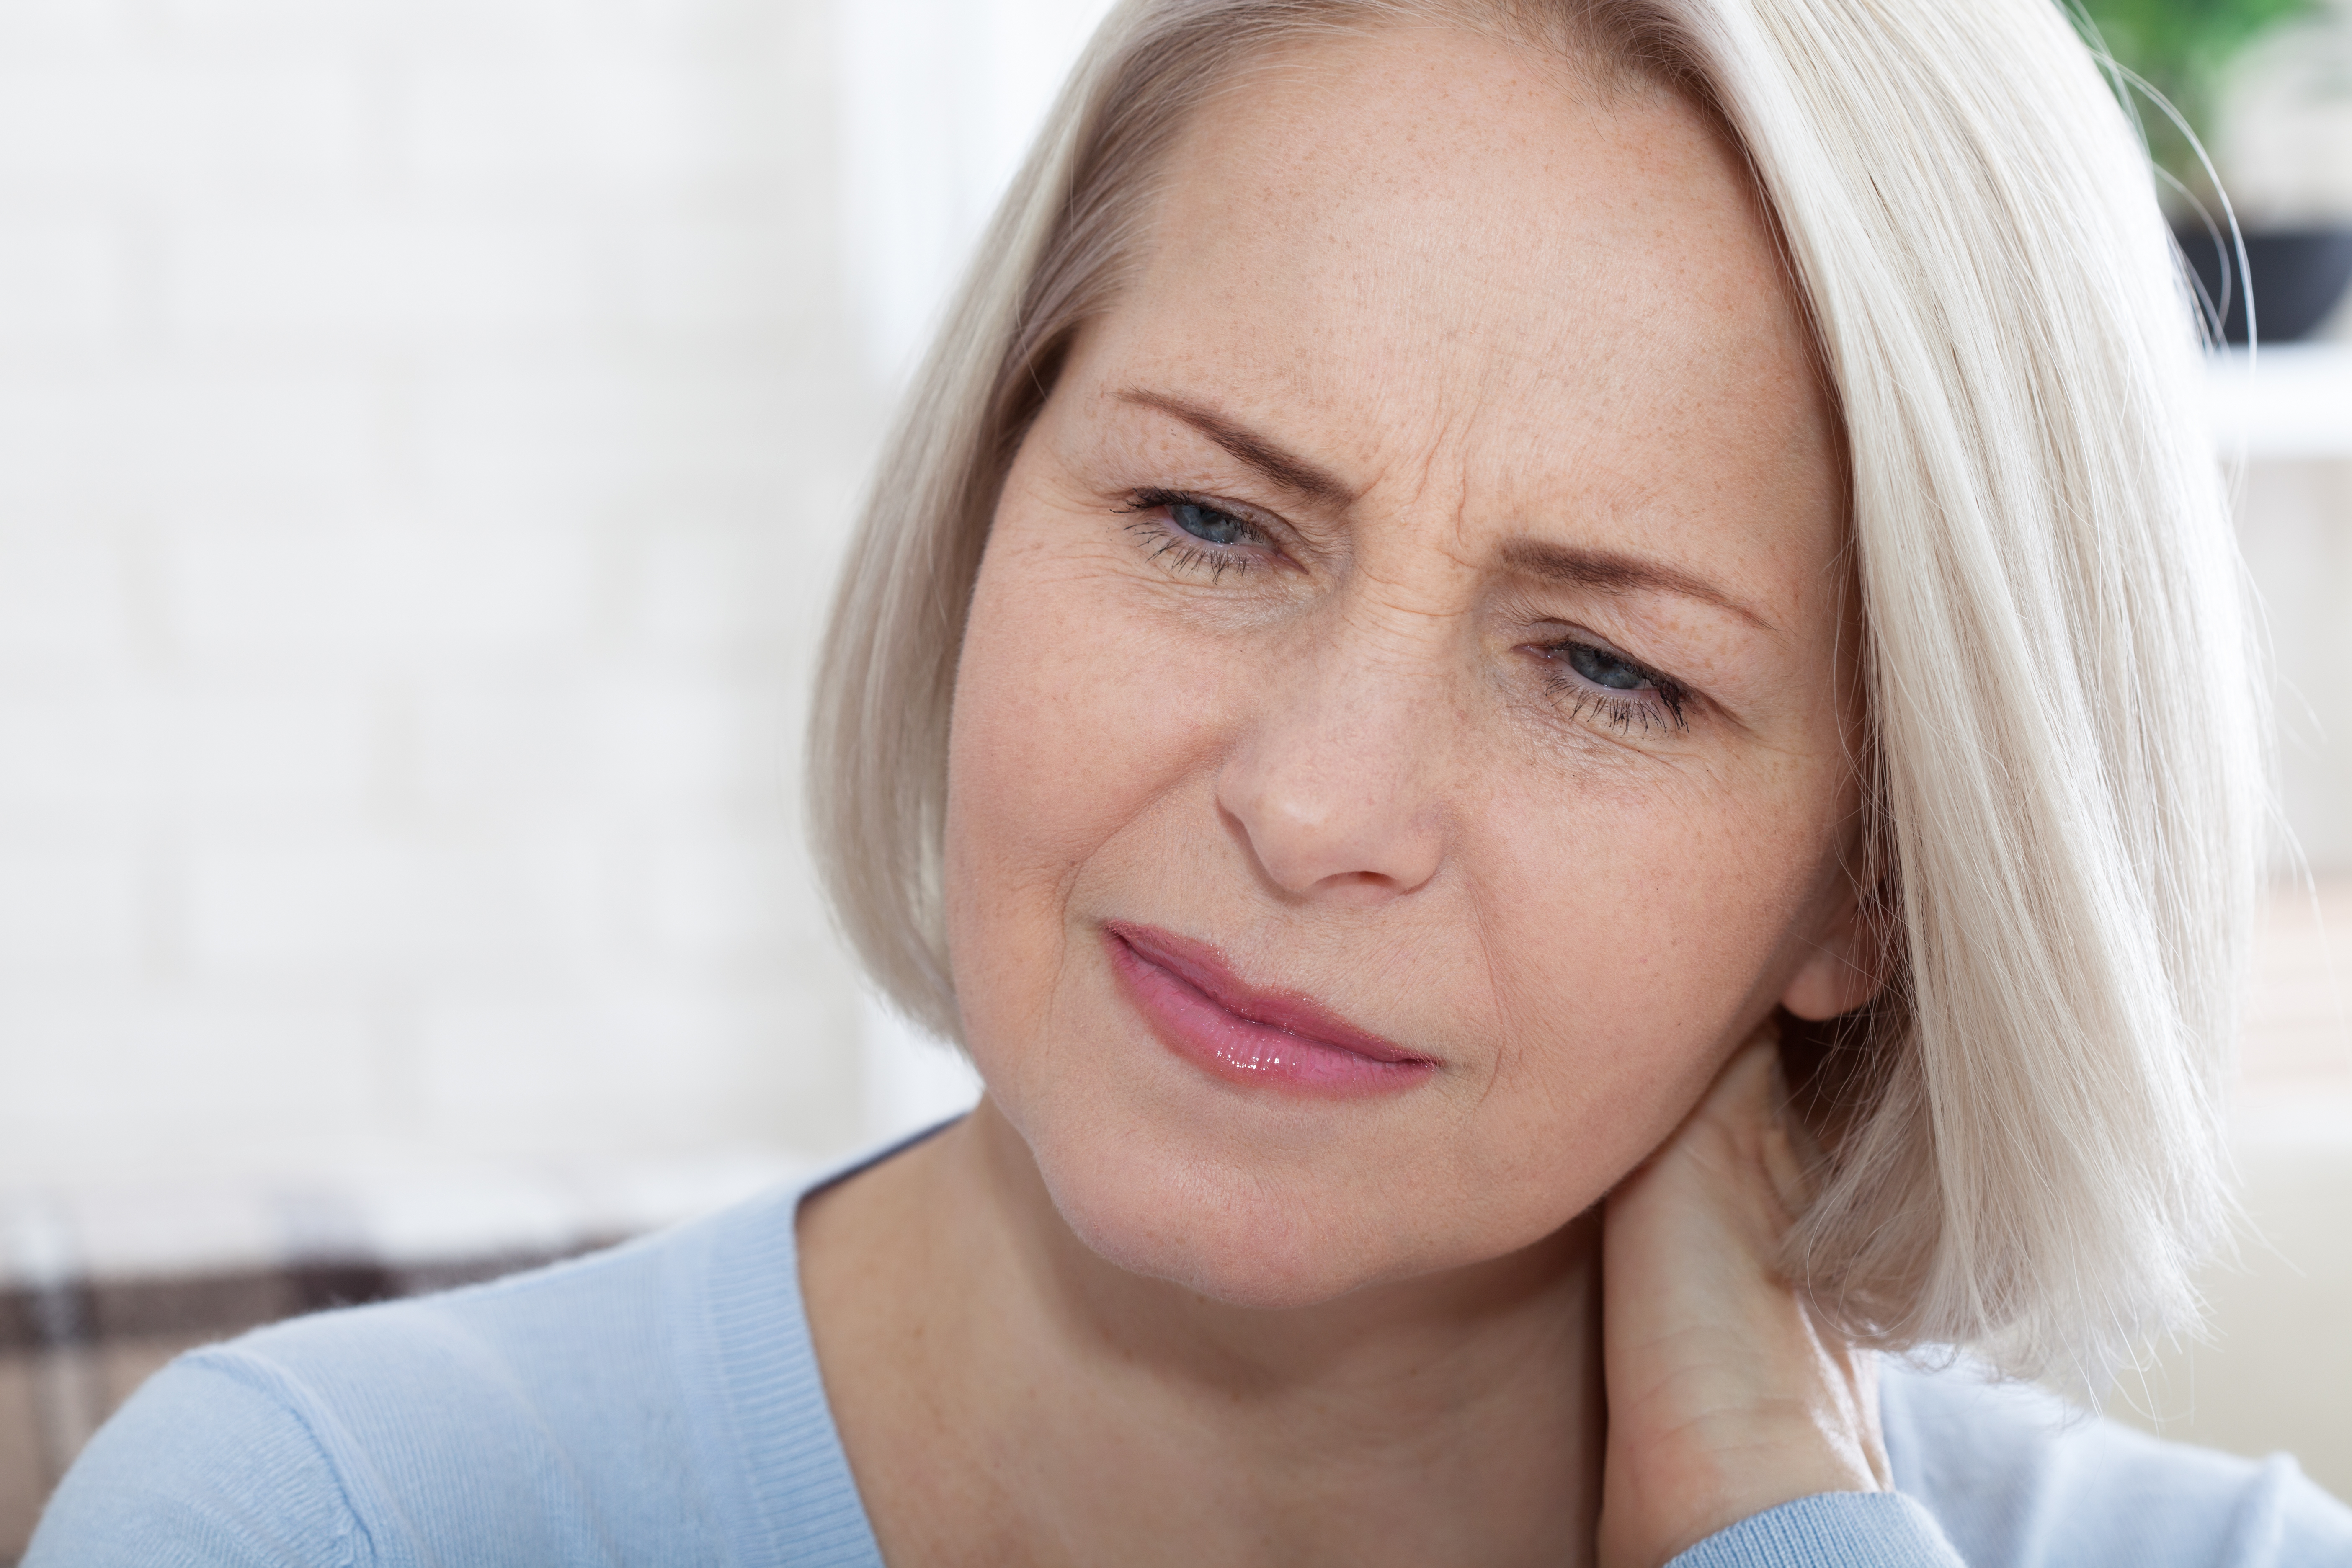 A woman with a worried expression on her face | Source: Shutterstock